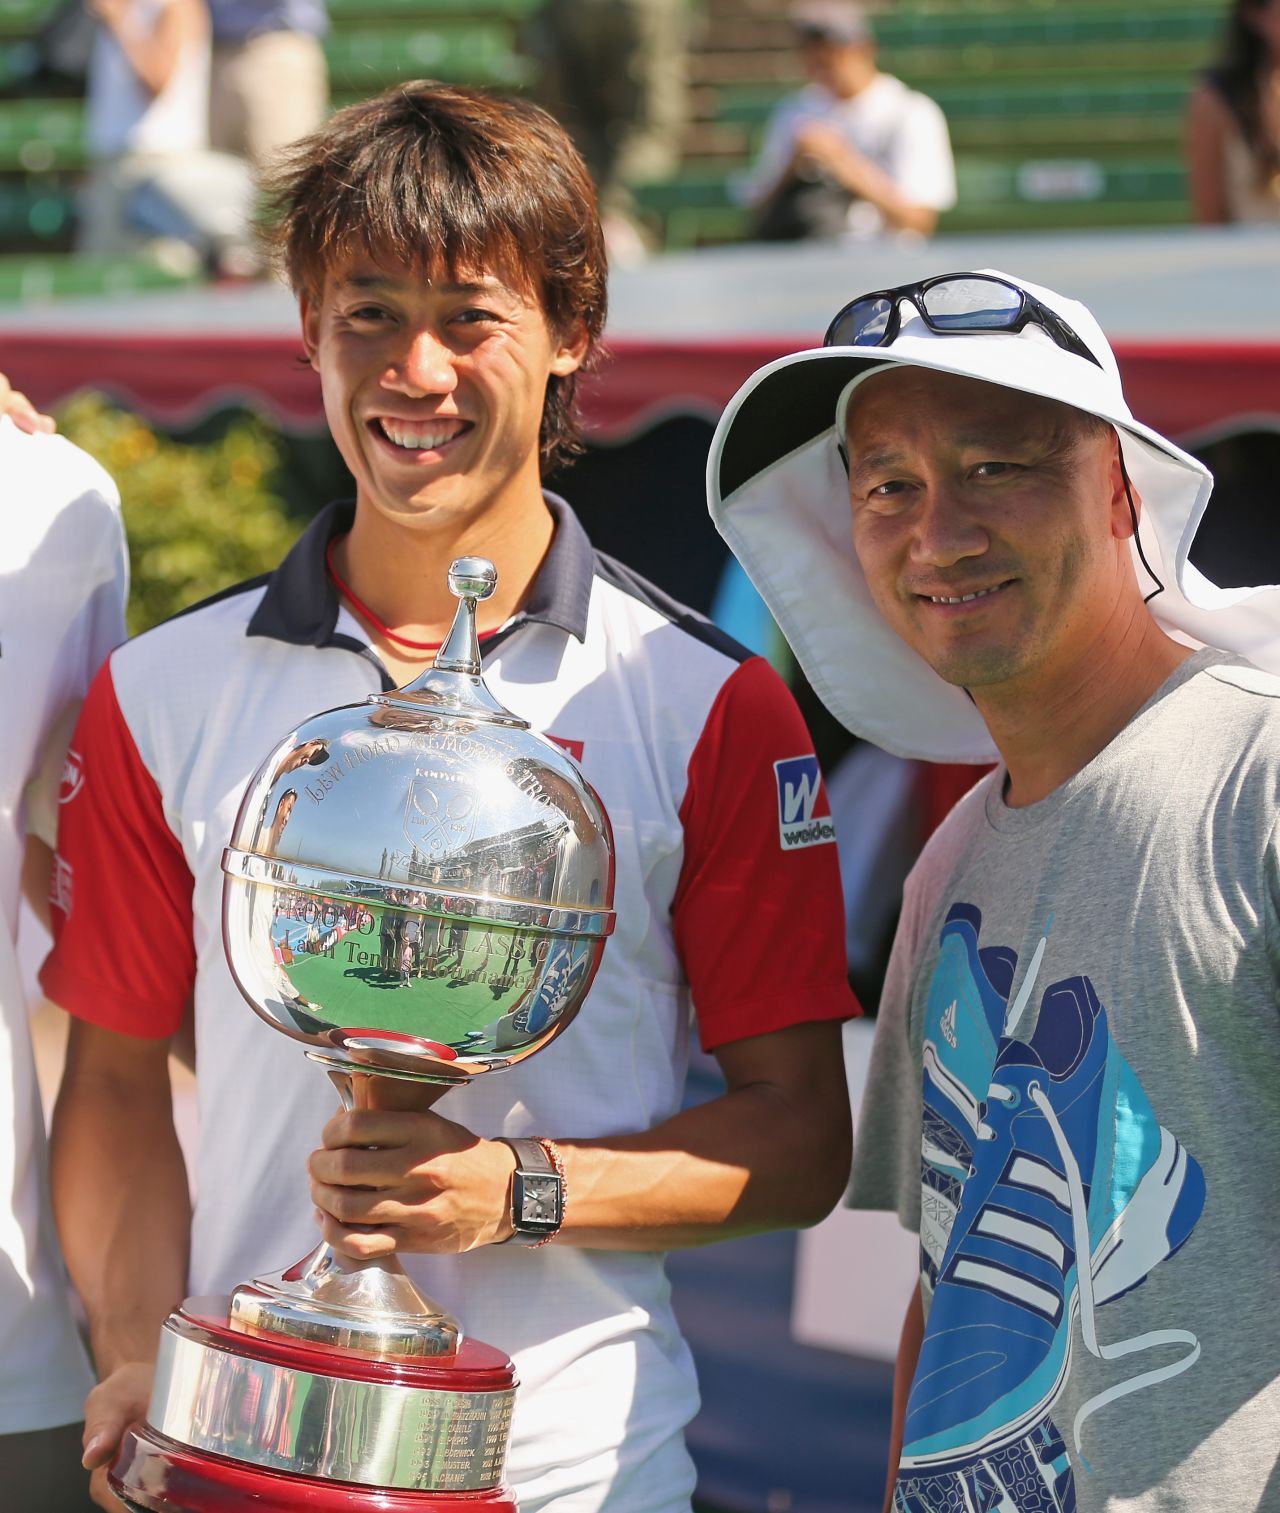 Michael Chang (right), who stunned Edberg in the 1989 French Open final as a teenager, took up a coaching role with rising Japanese star Nishikori in December 2013.